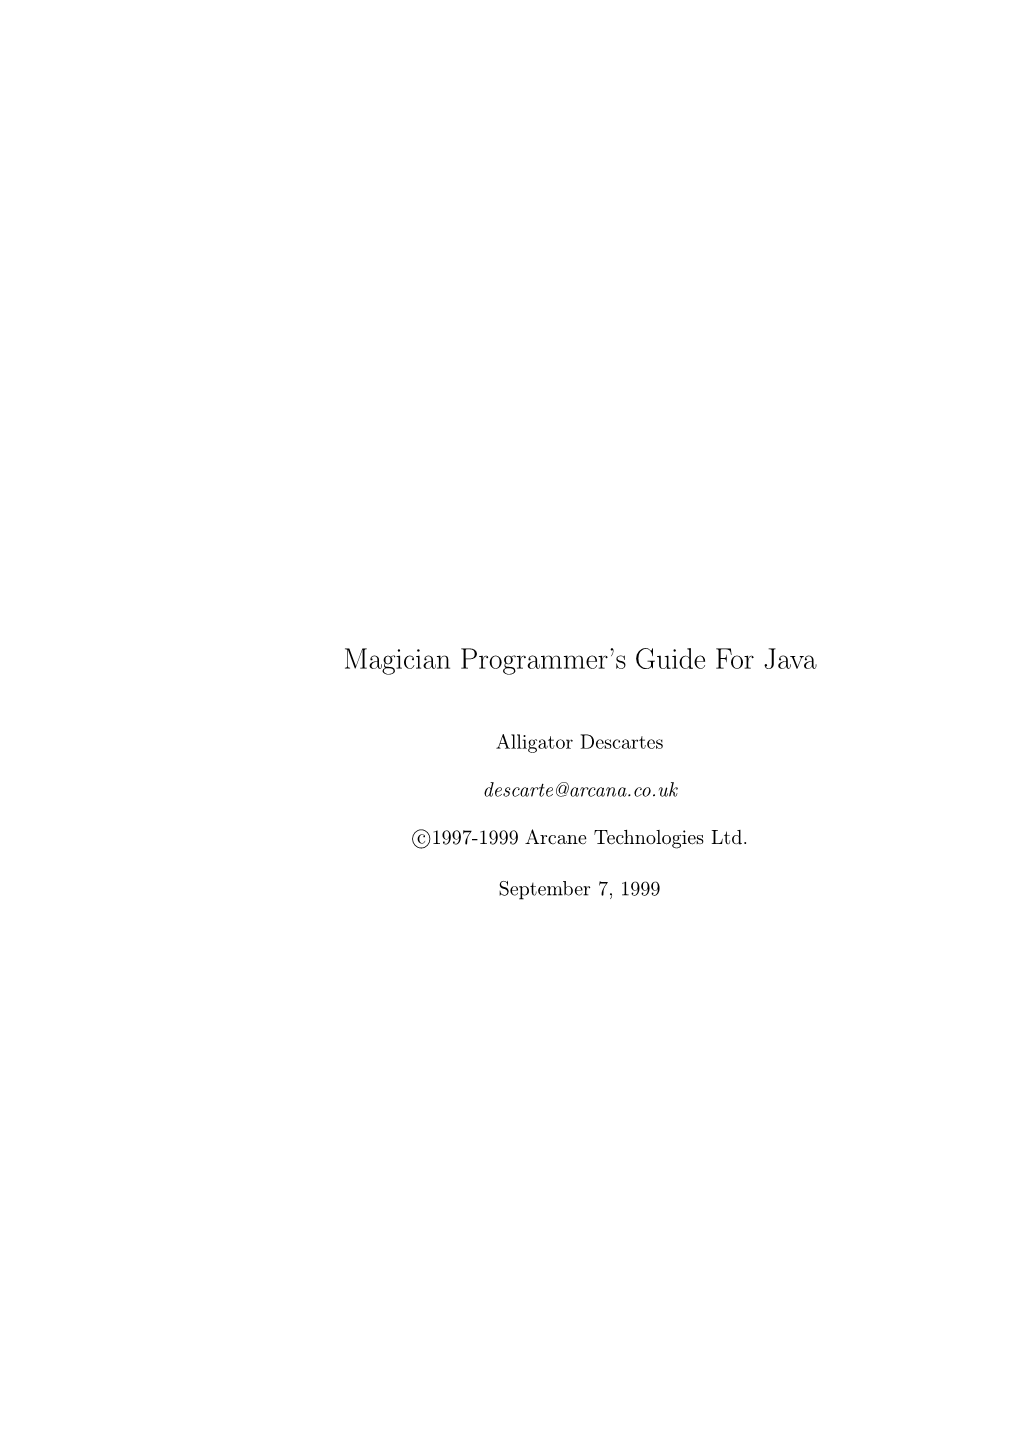 Magician Programmer's Guide for Java